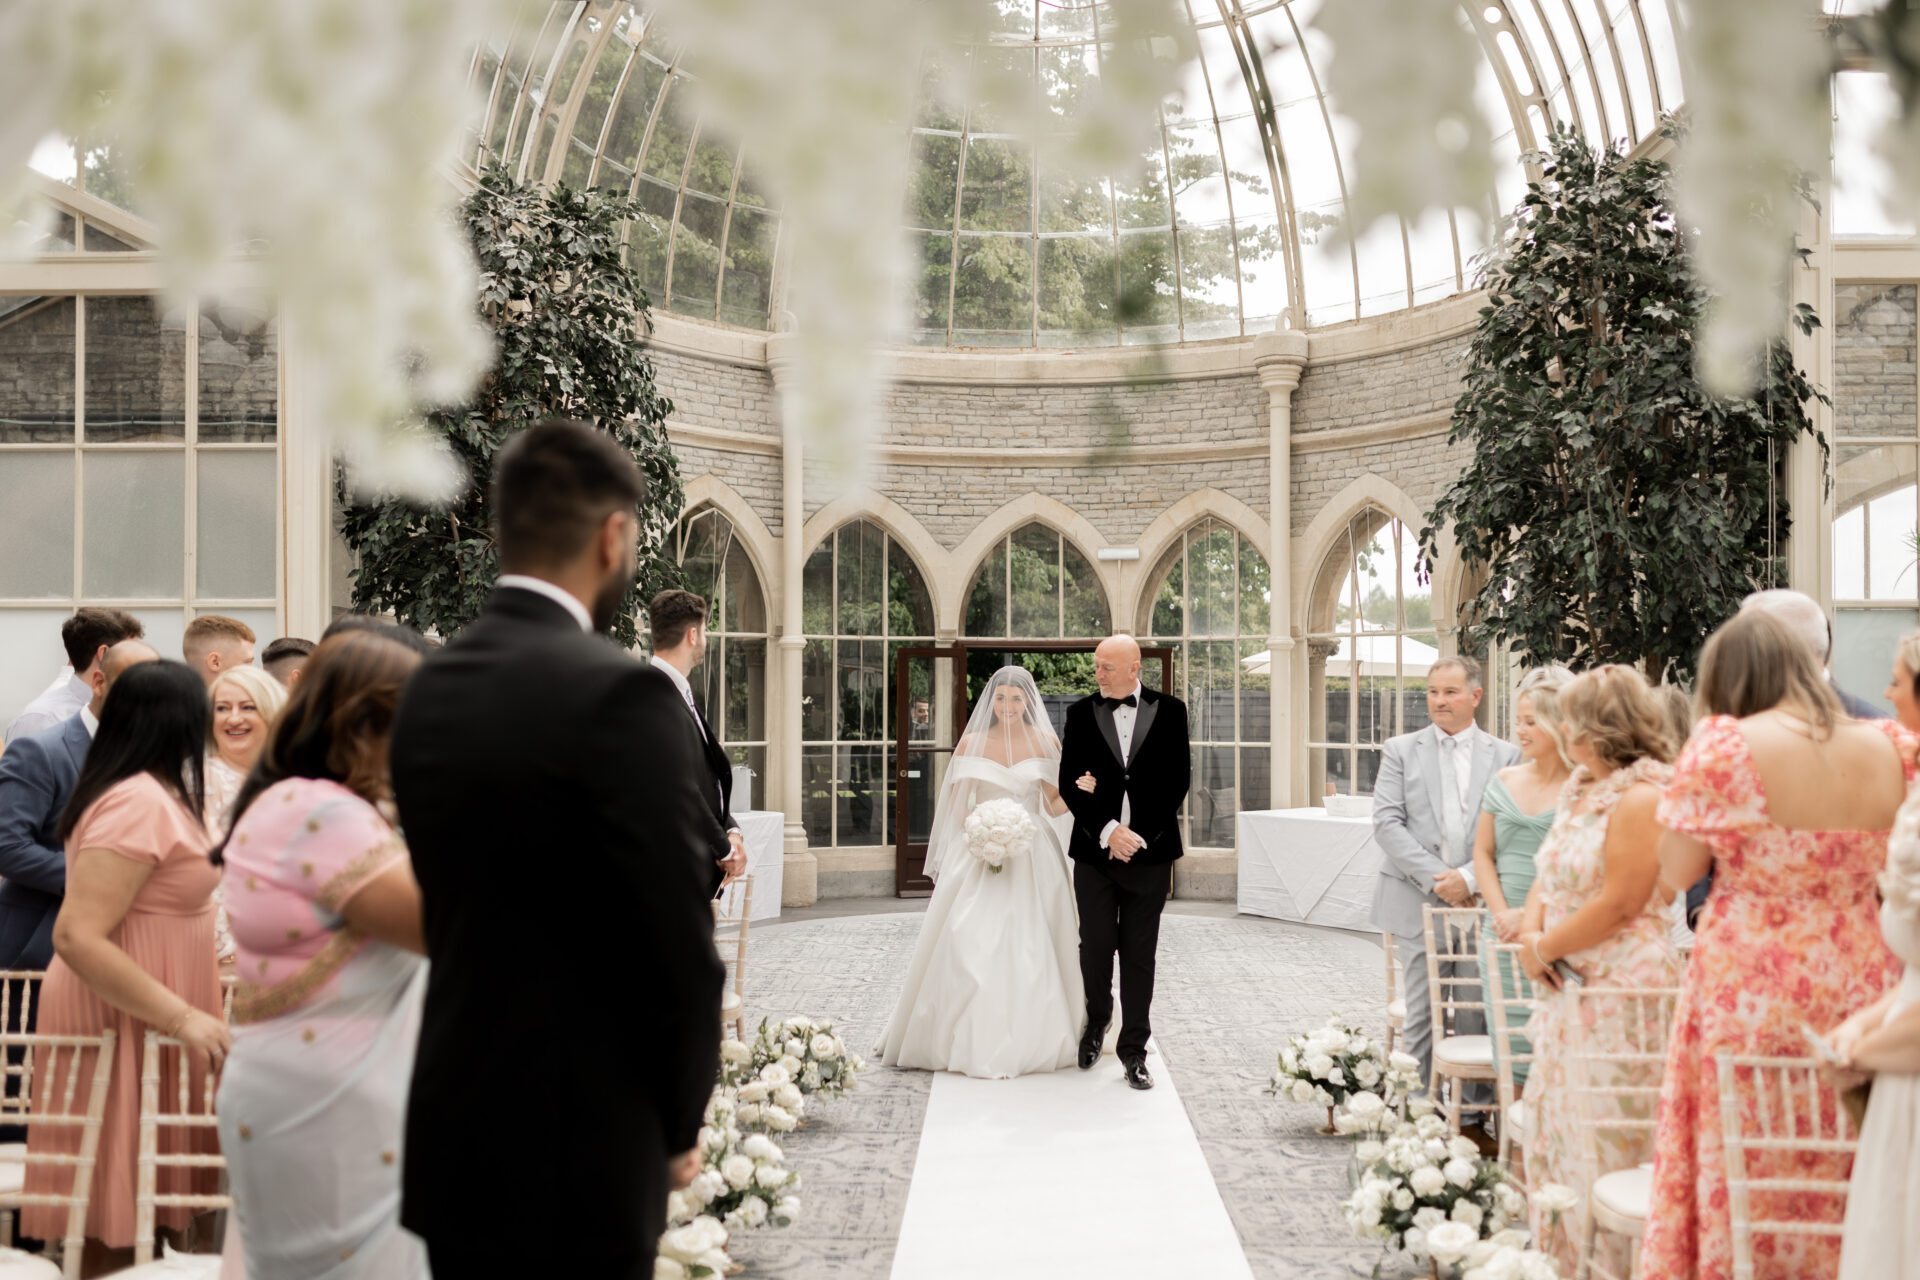 The bride and her father make their way down the aisle for the wedding ceremony in the Orangery at Tortworth Court